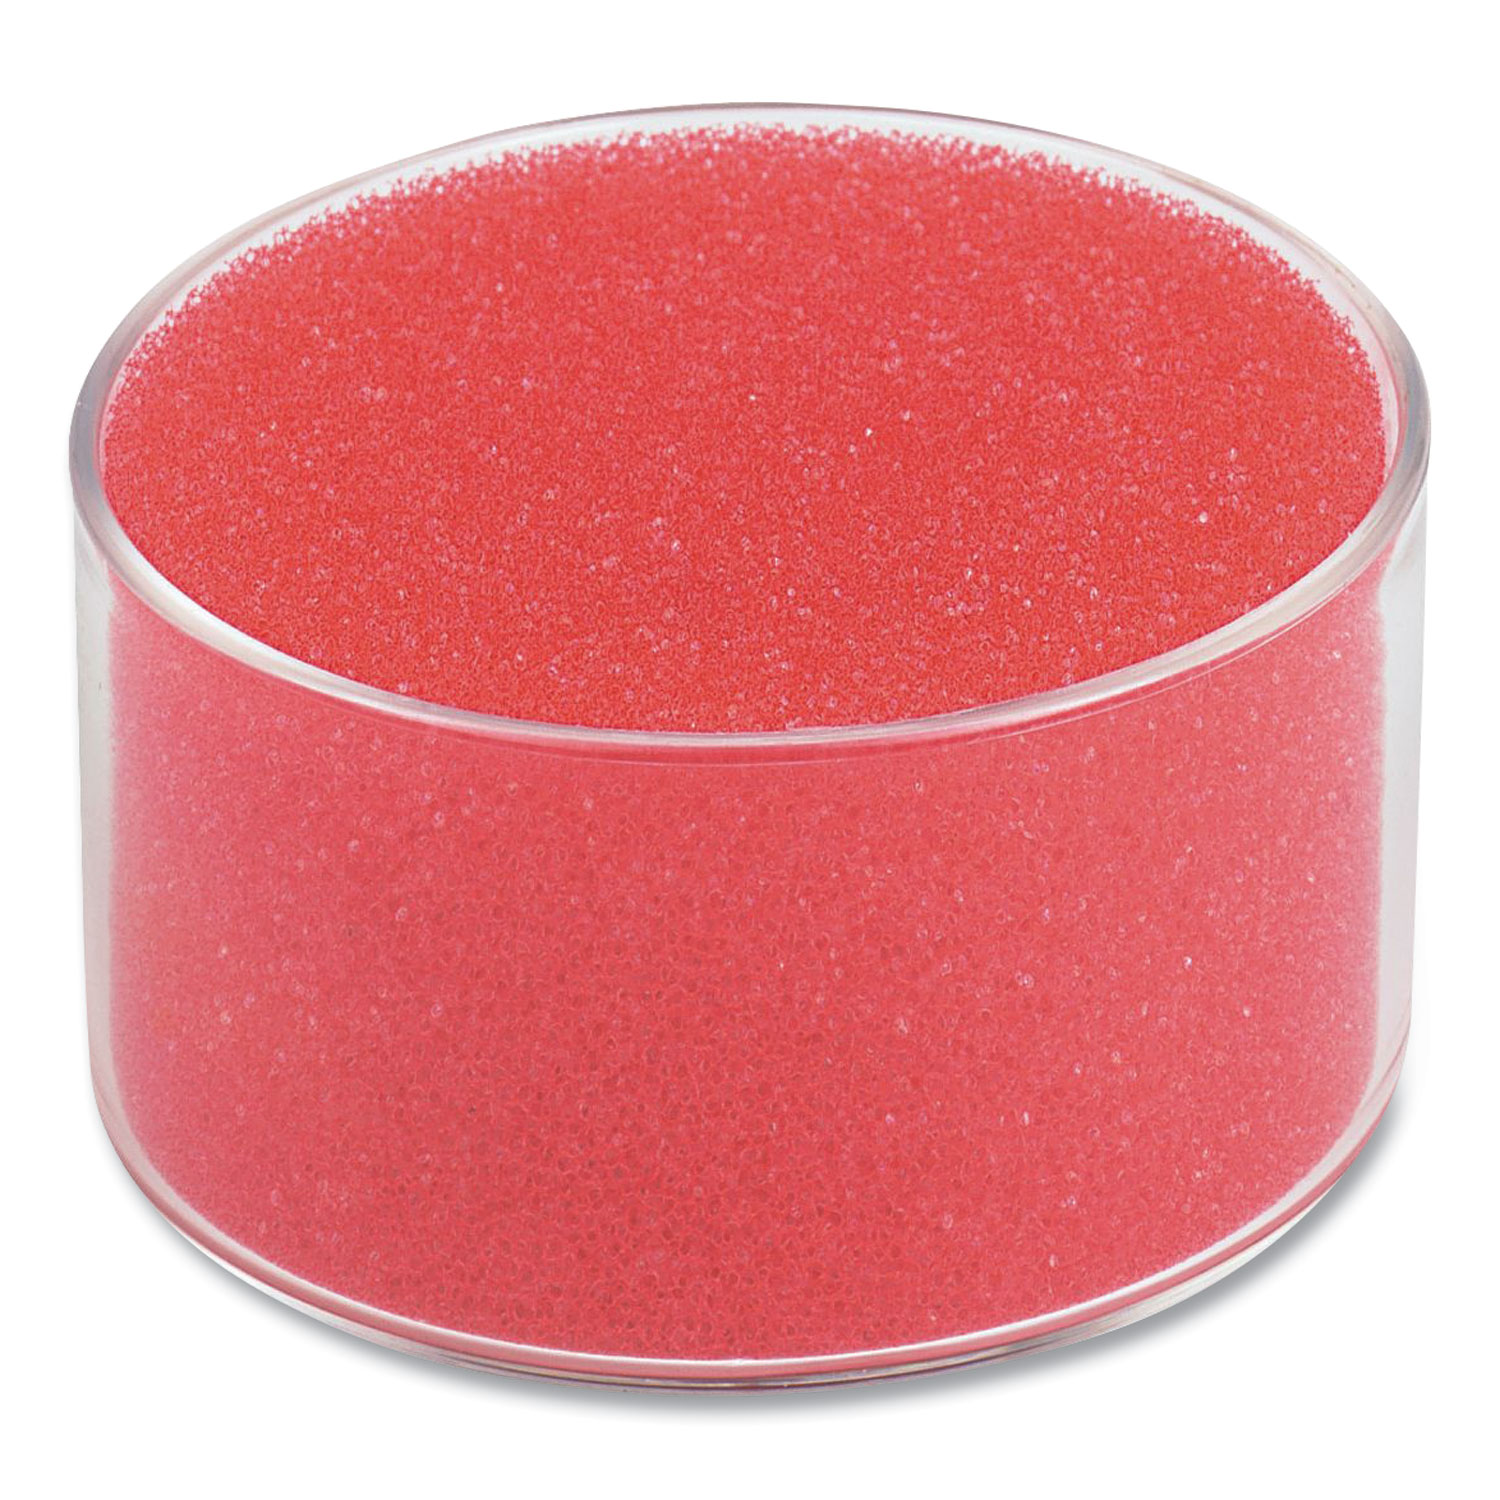  Officemate 99920 Sponge and Cup Moistener, 1.5h x 3dia, Red (OIC471576) 